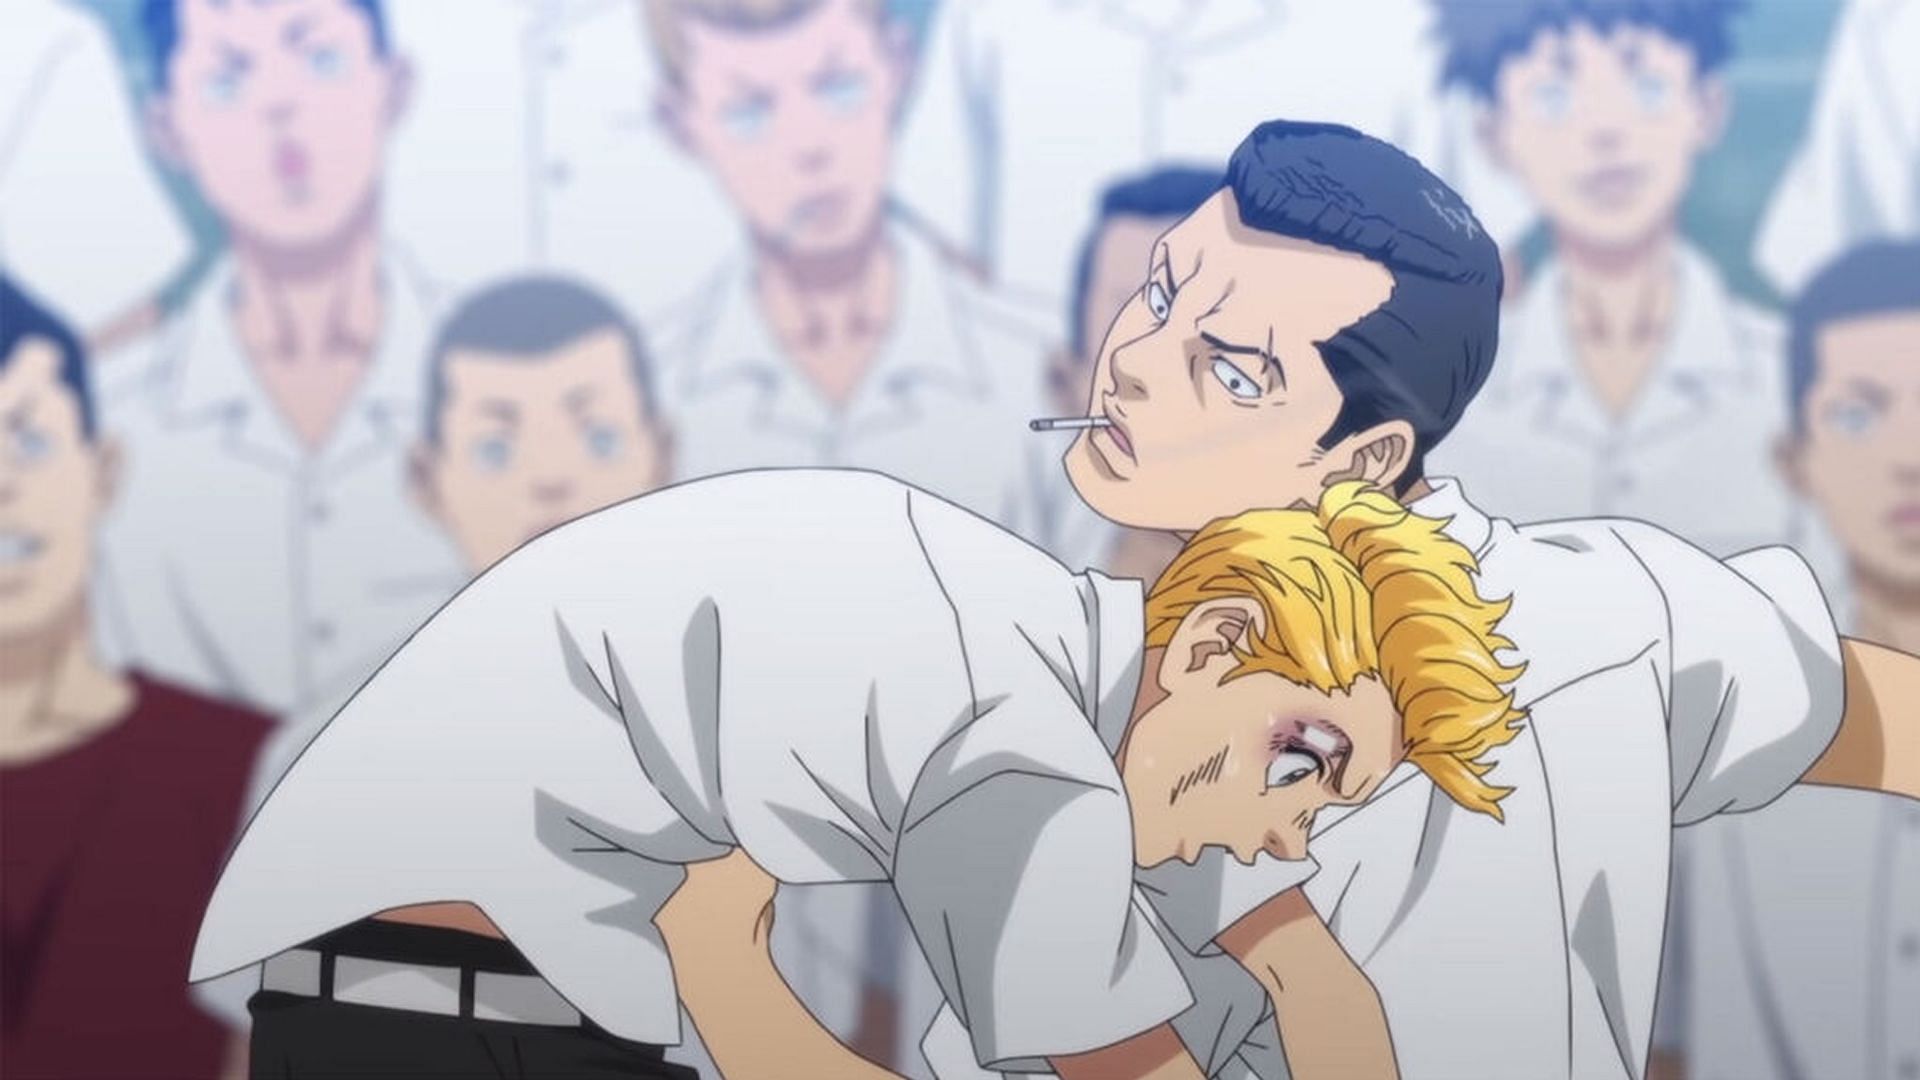 Takemichi getting punched (Image via Crunchyroll)